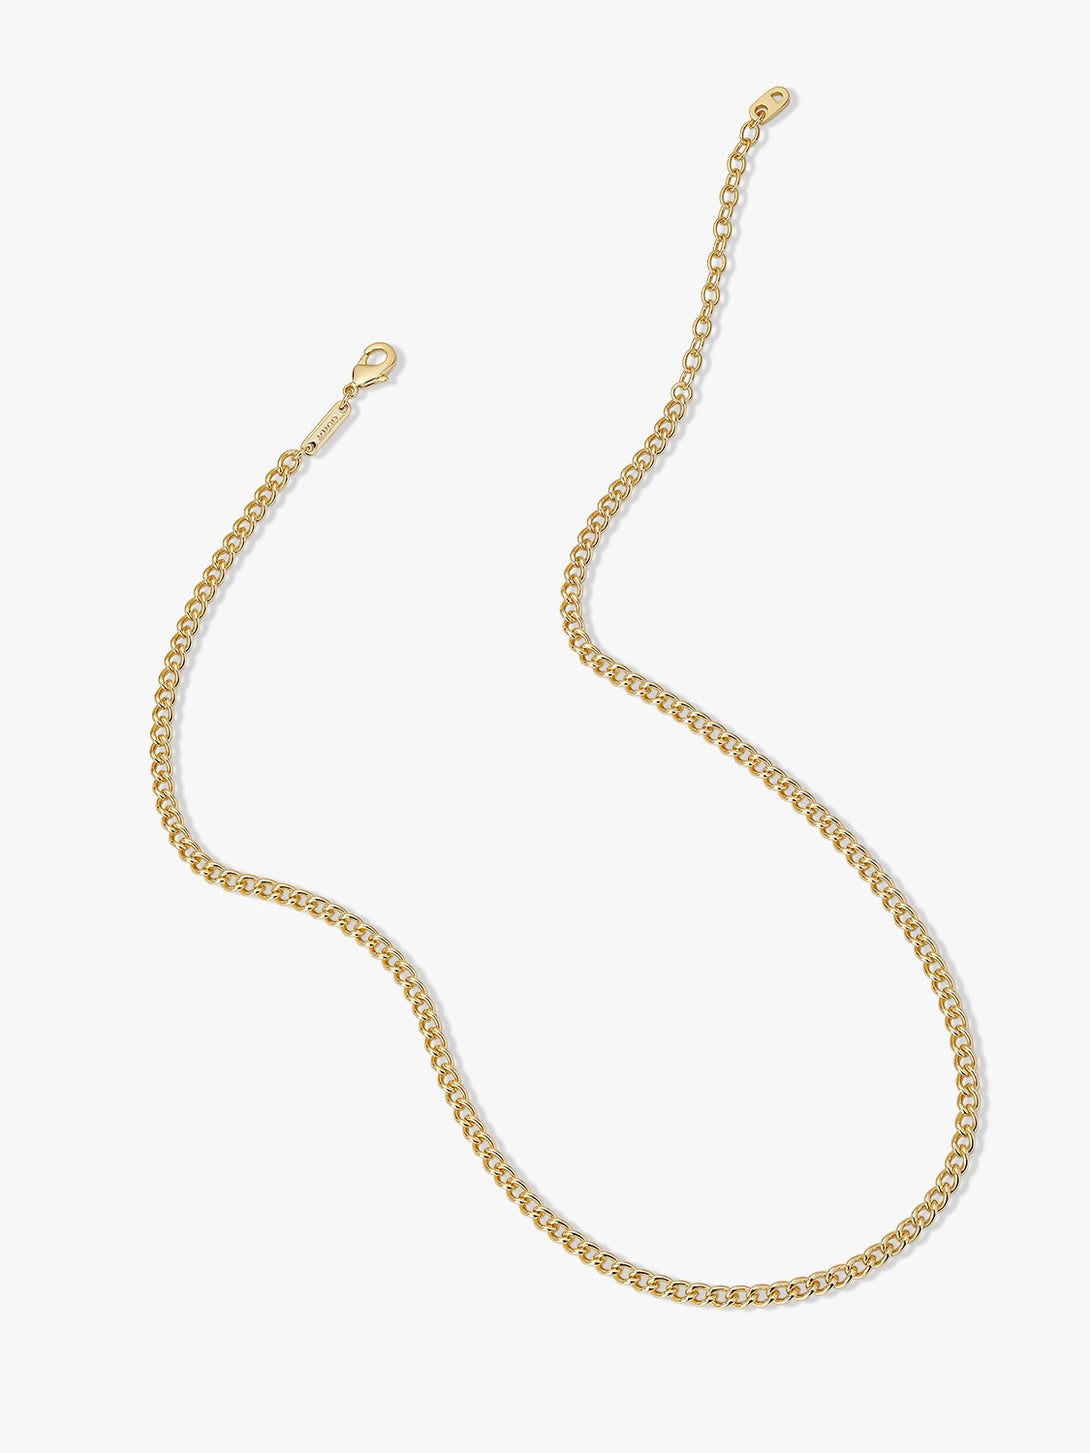 Daily Snake Chain Necklace - OOTDY